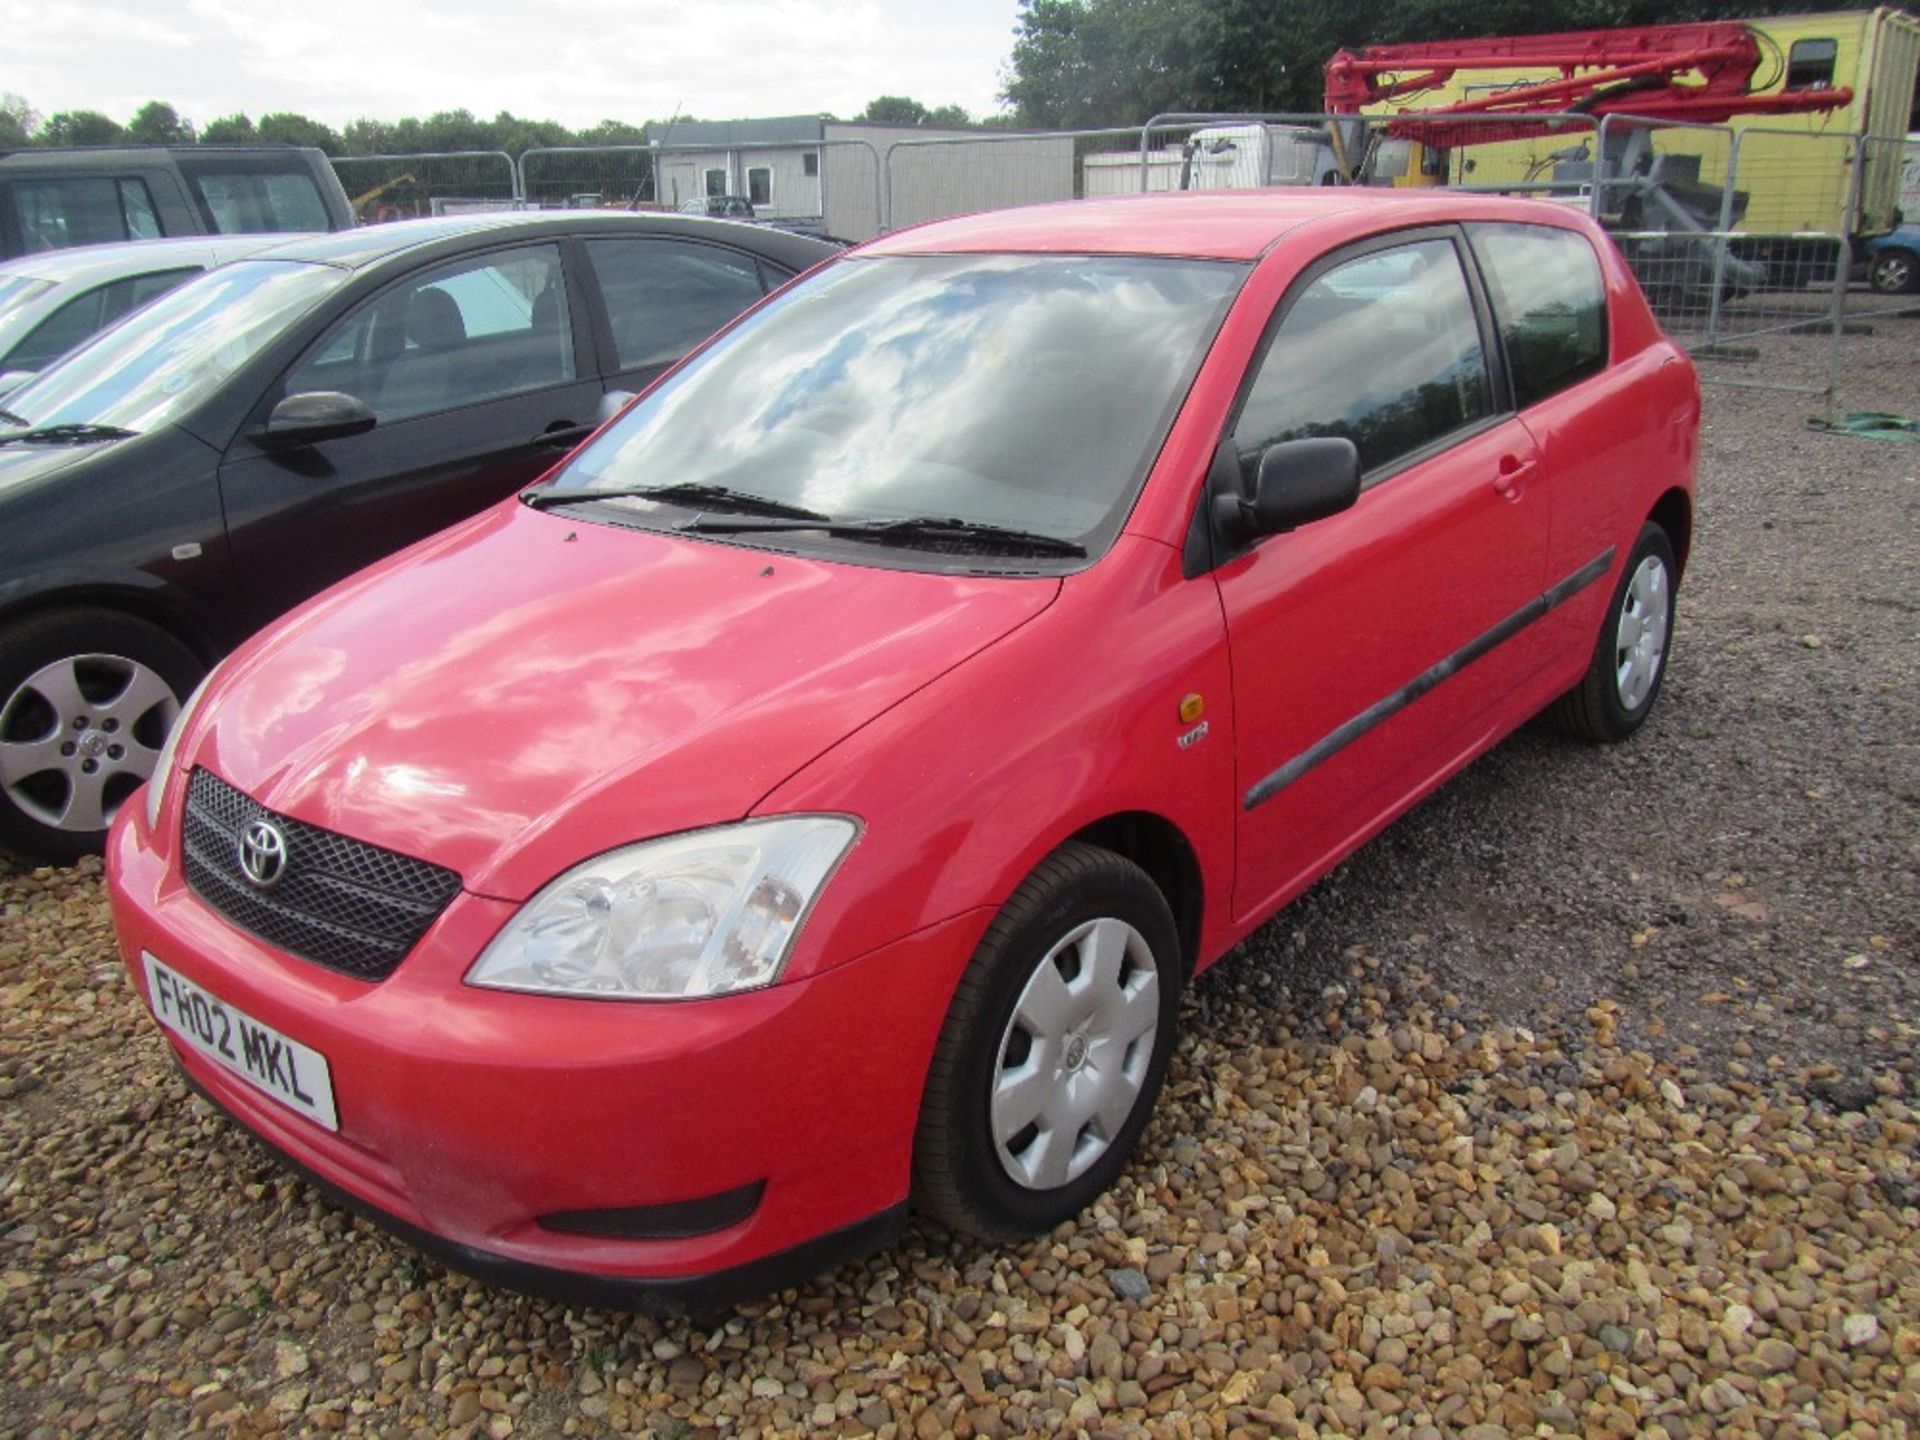 Toyota Corrola 1.4 Petrol. 1 Owner from new. Reg. Docs & Service History will be supplied Mileage: